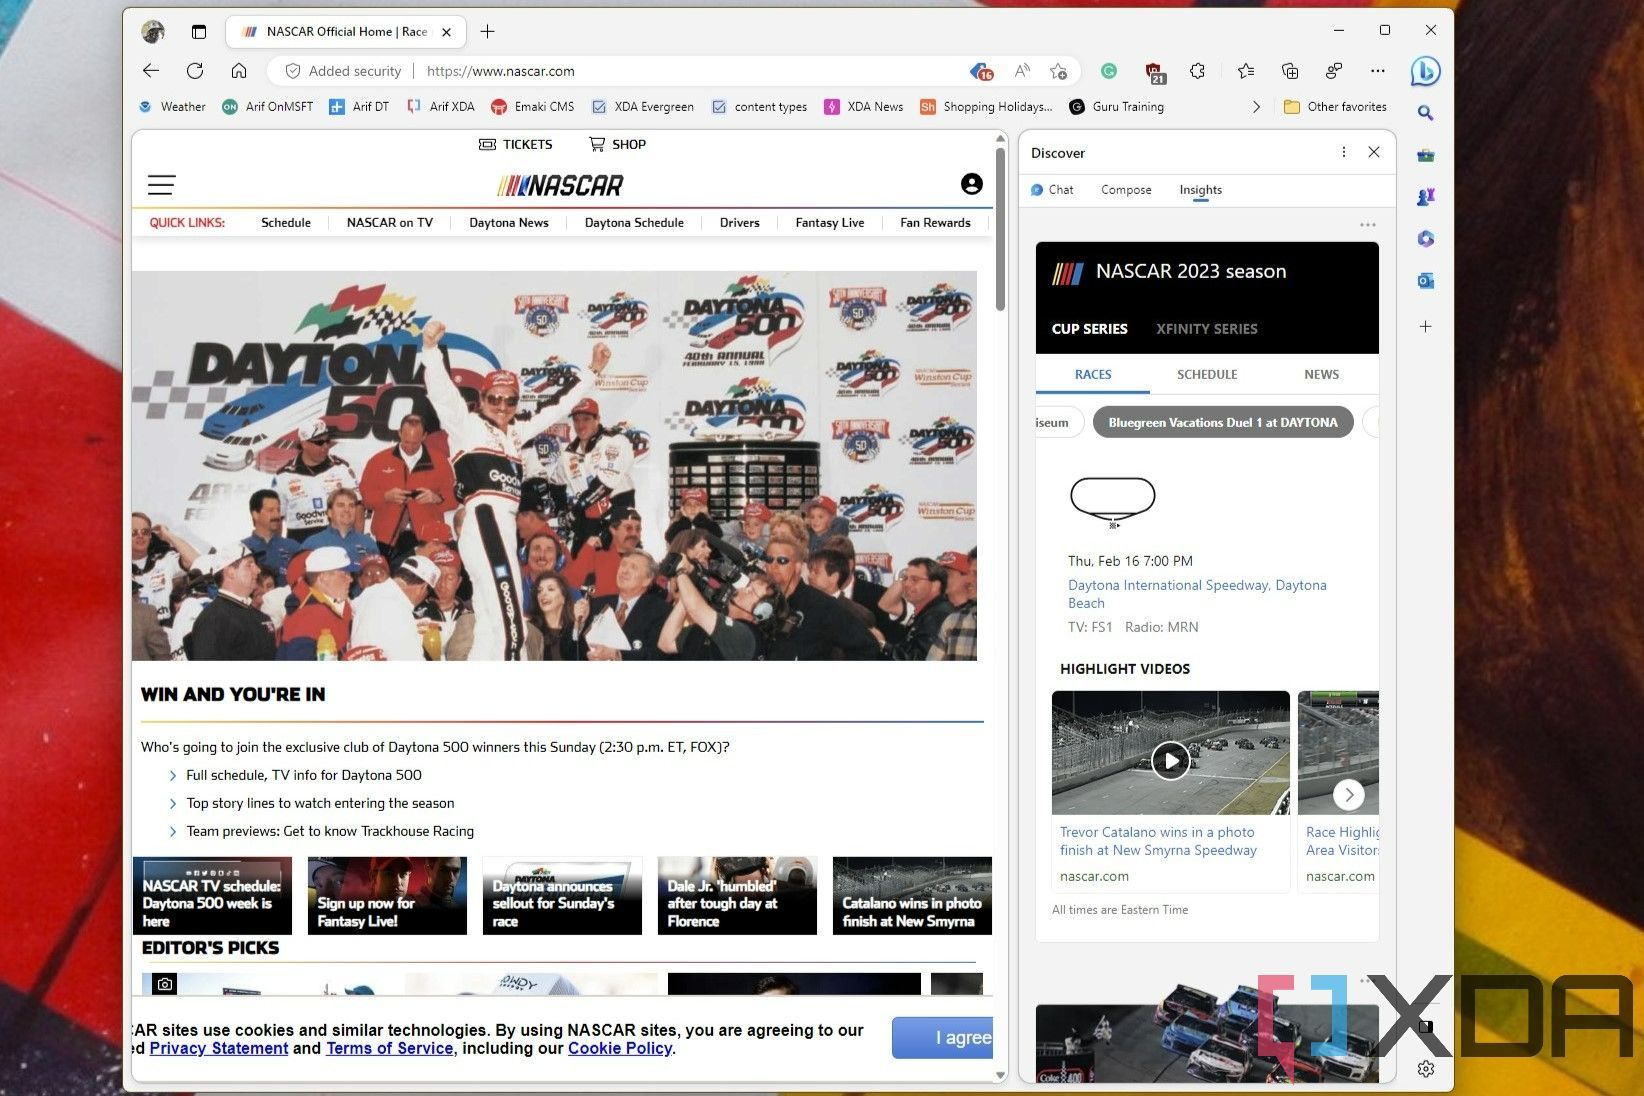 The NASCAR website open in the new Edge